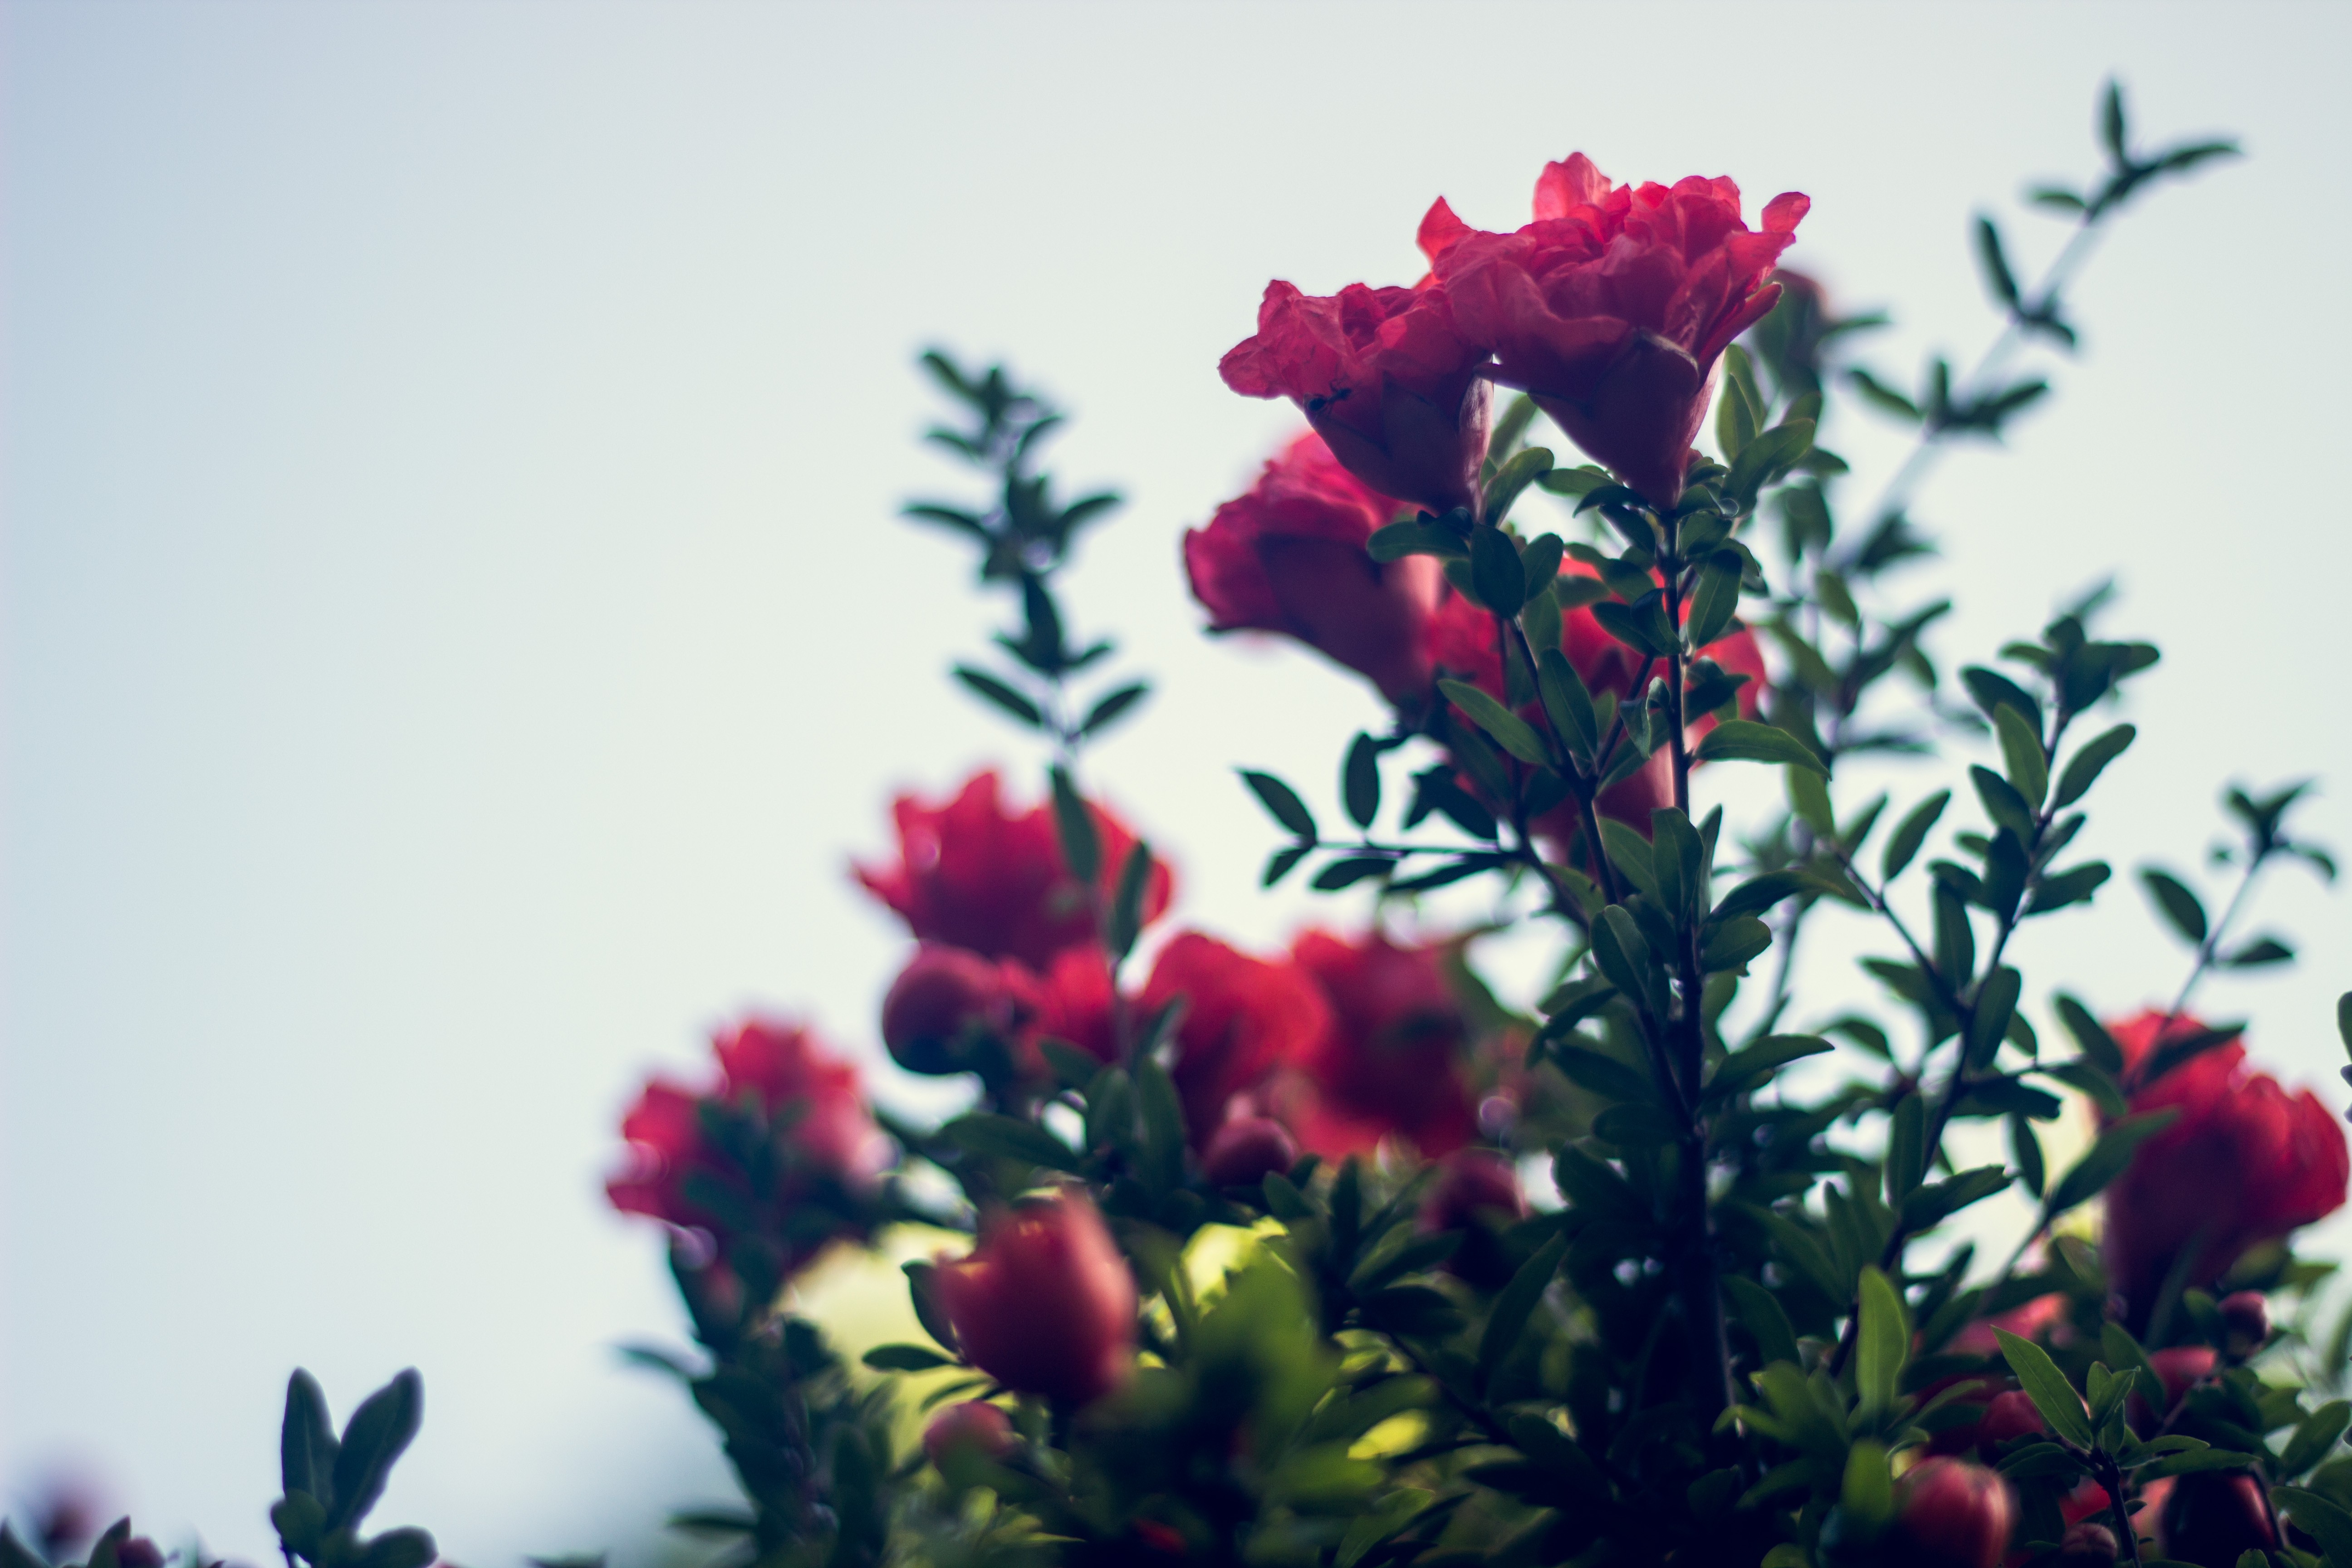 General 5184x3456 flowers plants outdoors red flowers garden closeup simple background